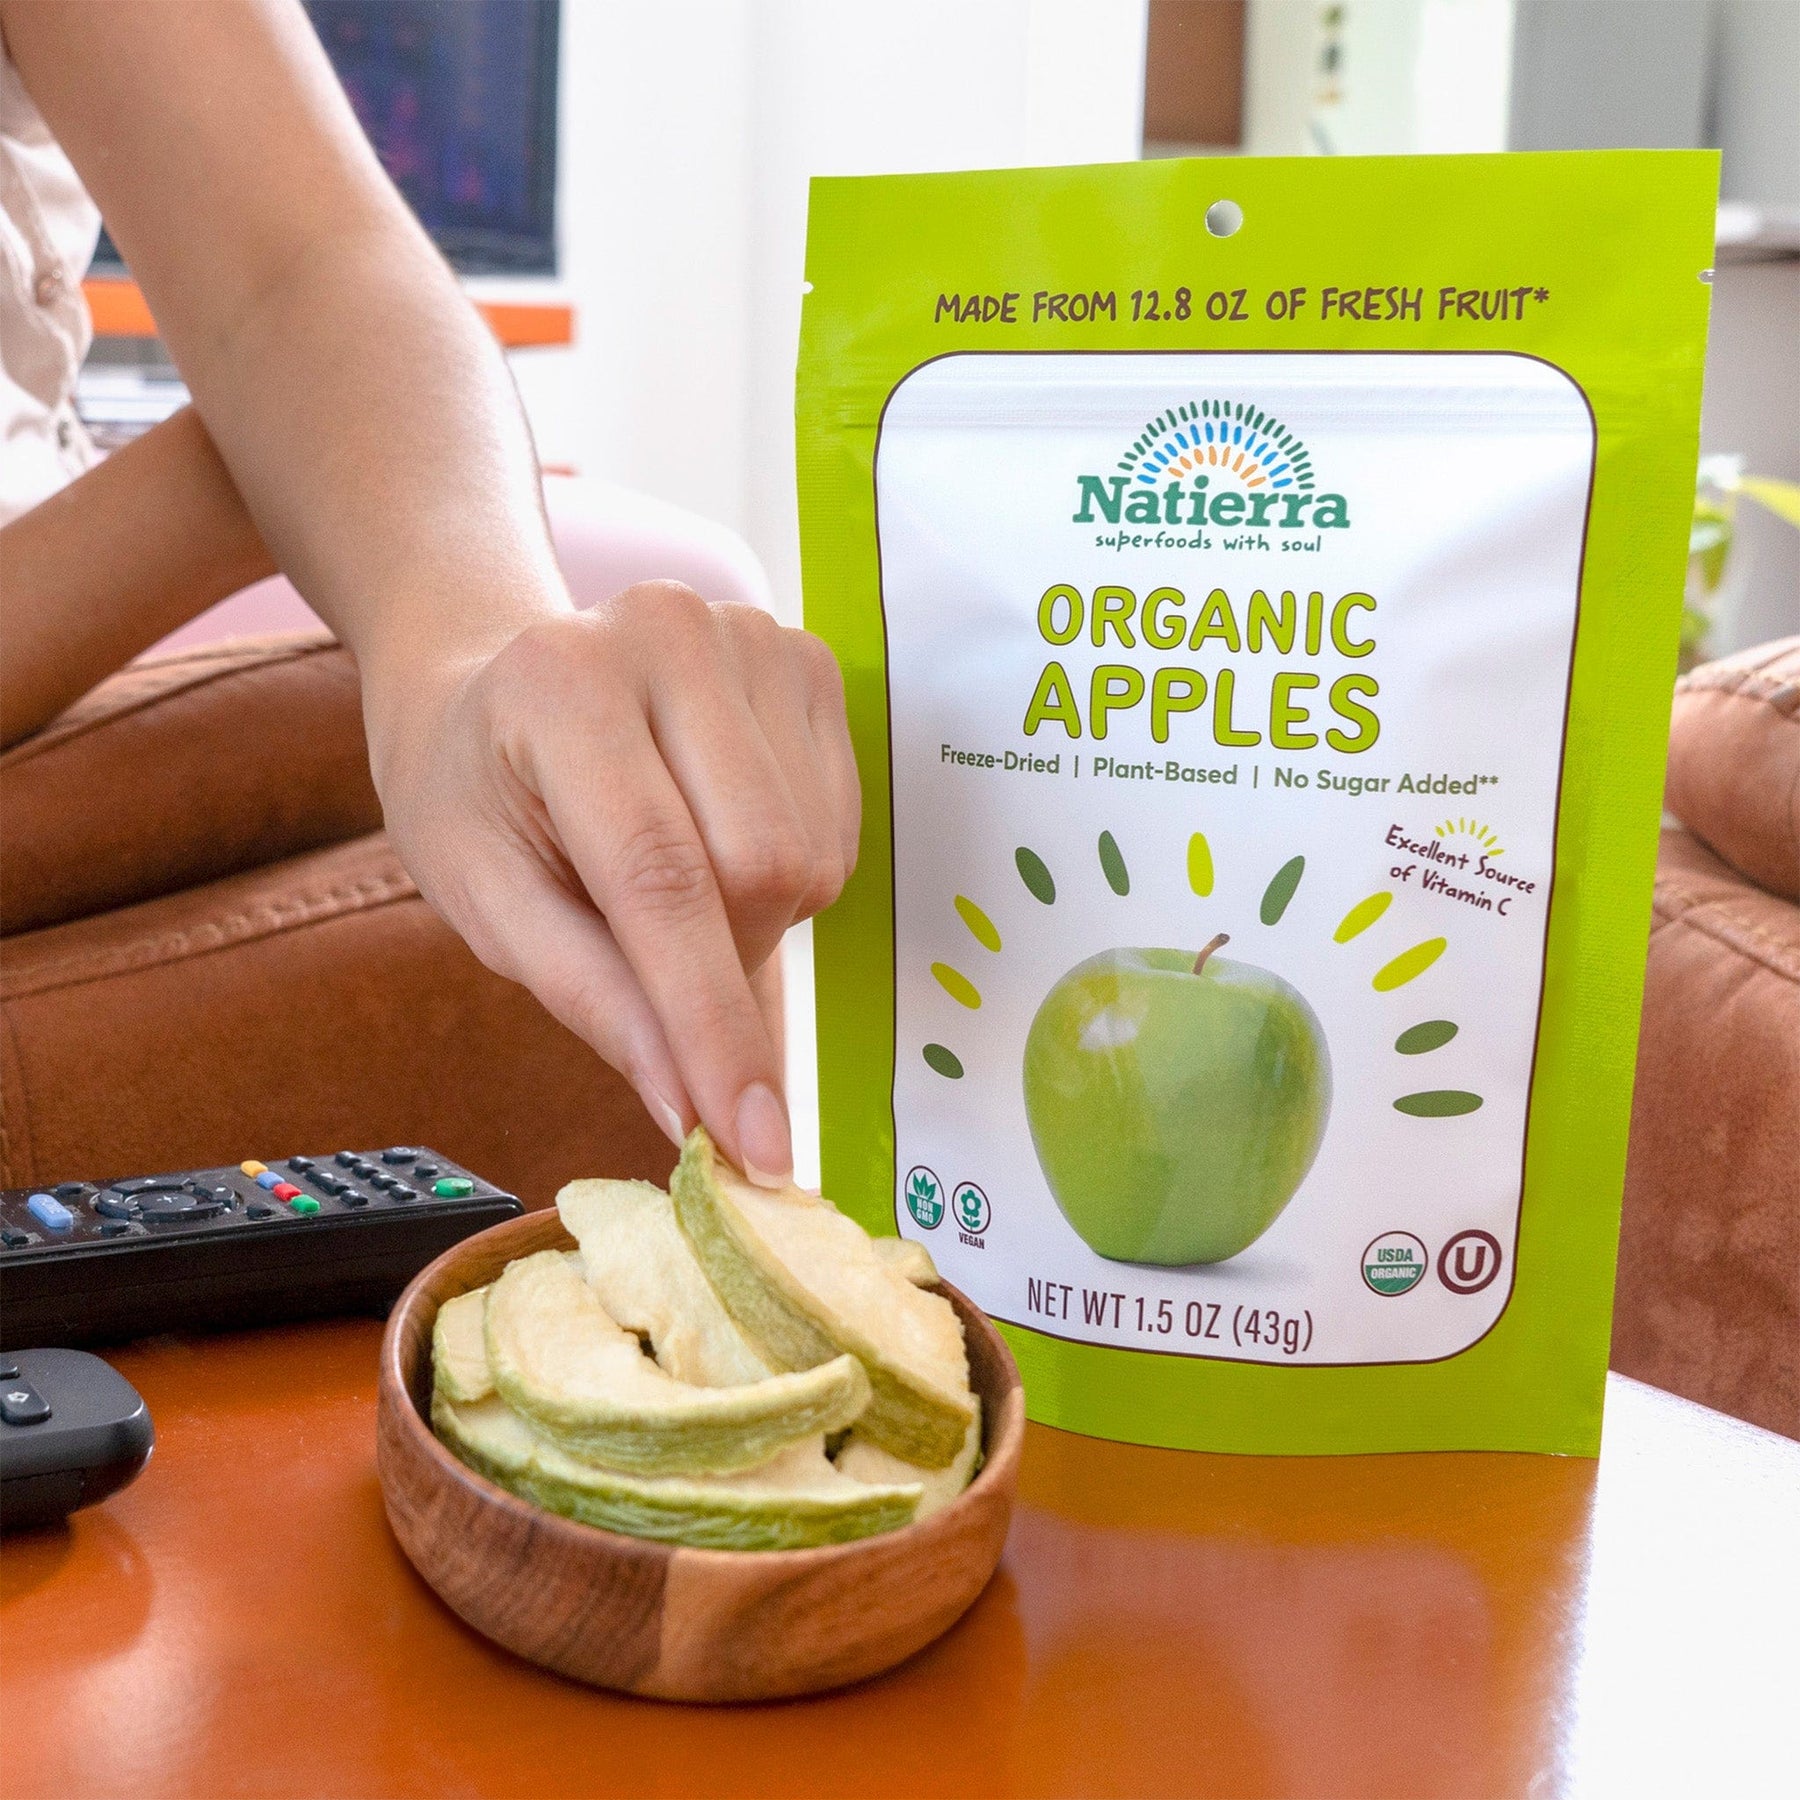 A hand grabbing apple slices from a small bowl next to a bag of Natierra Organic Freeze-Dried Apples